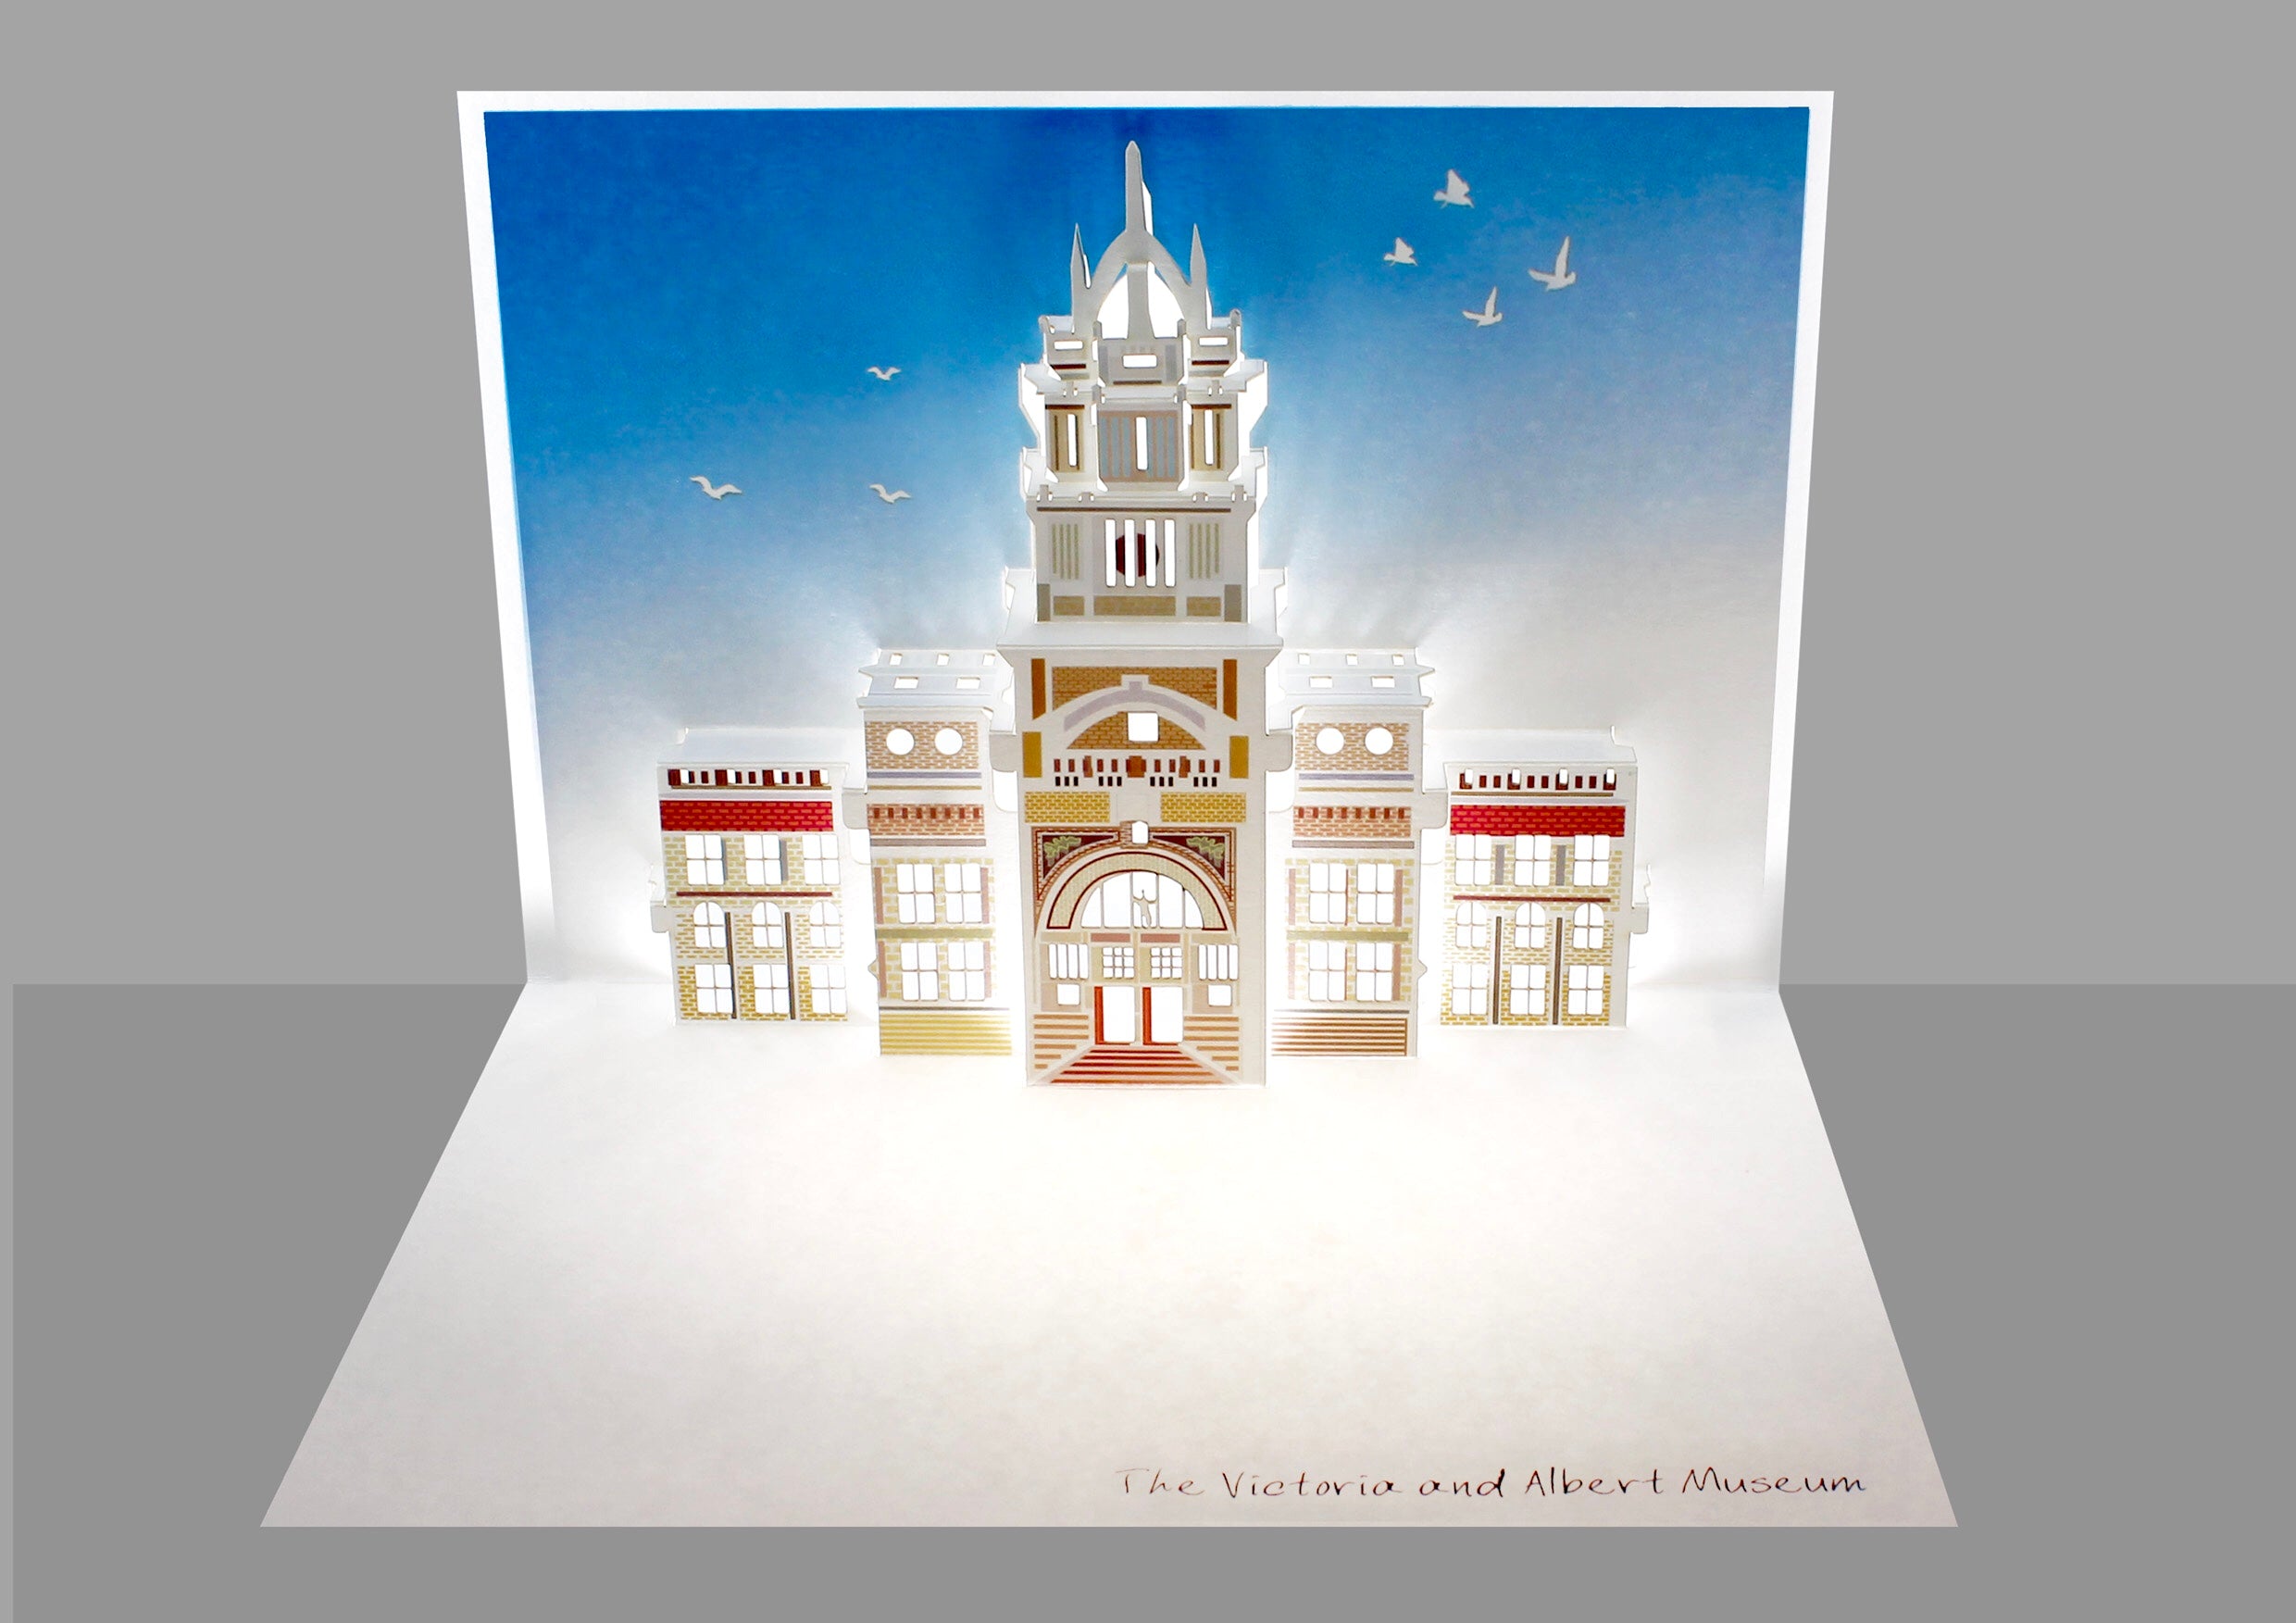 Victoria and Albert Museum Iconic London Landmarks 3D Pop Up Birthday Greeting Card